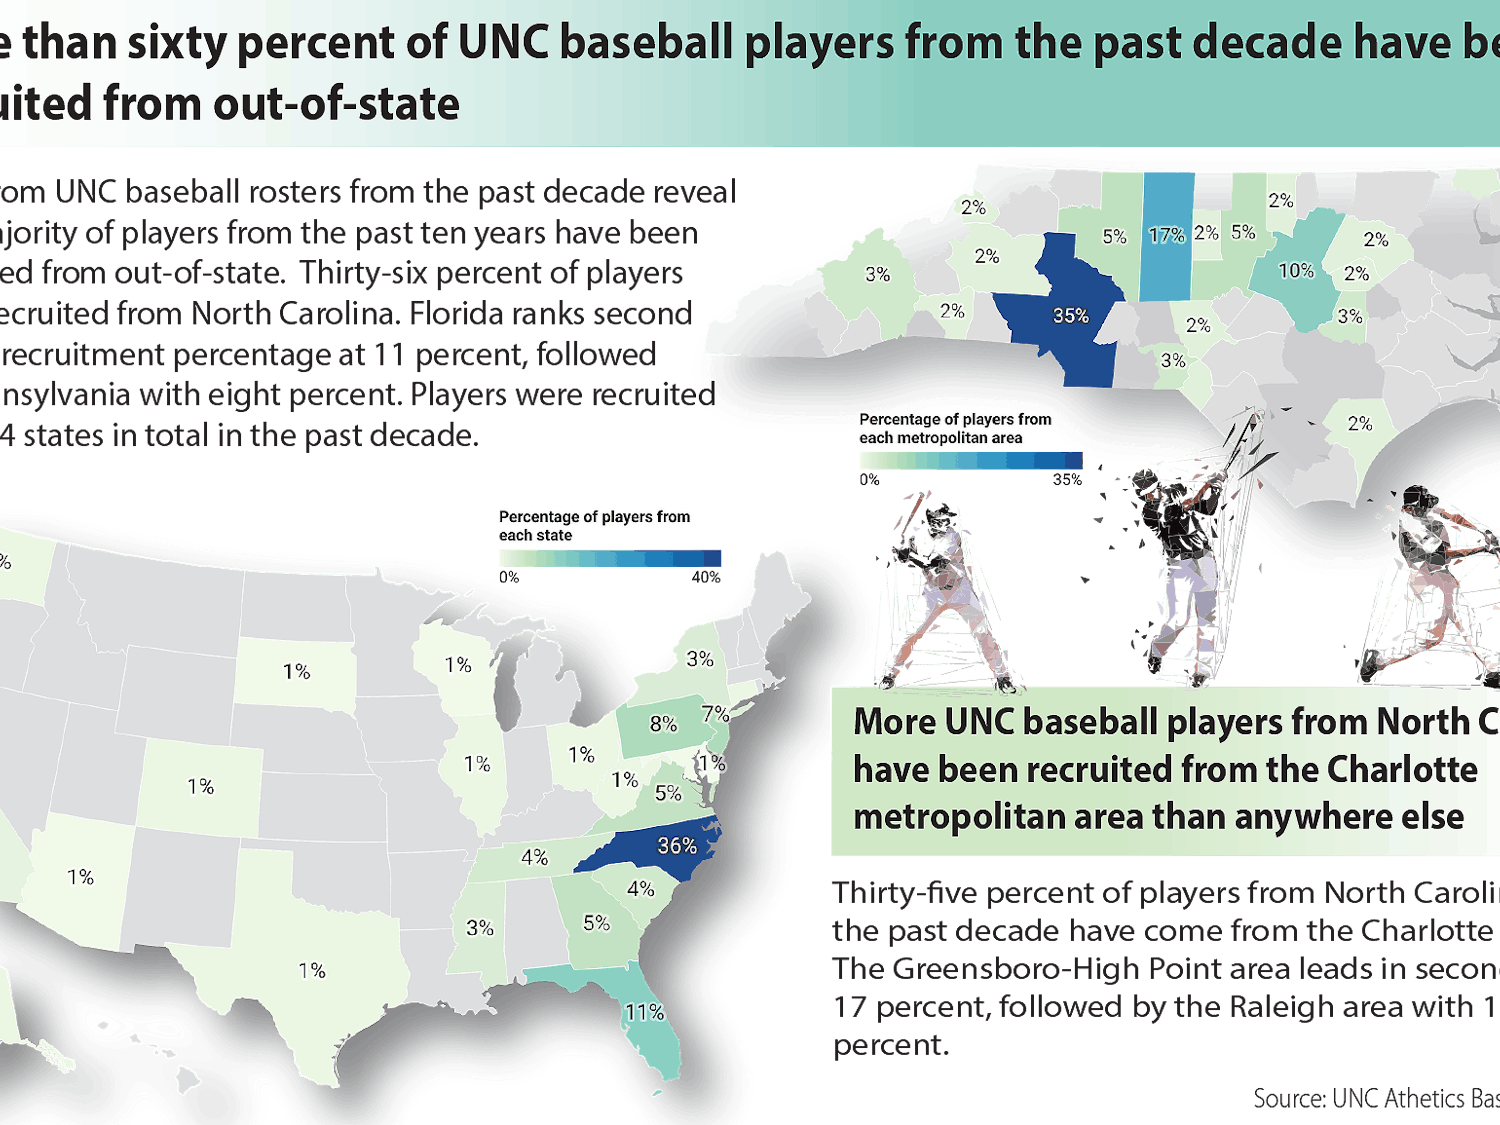 More than sixty percent of UNC baseball players from the past decade have been recruited from out-of-state